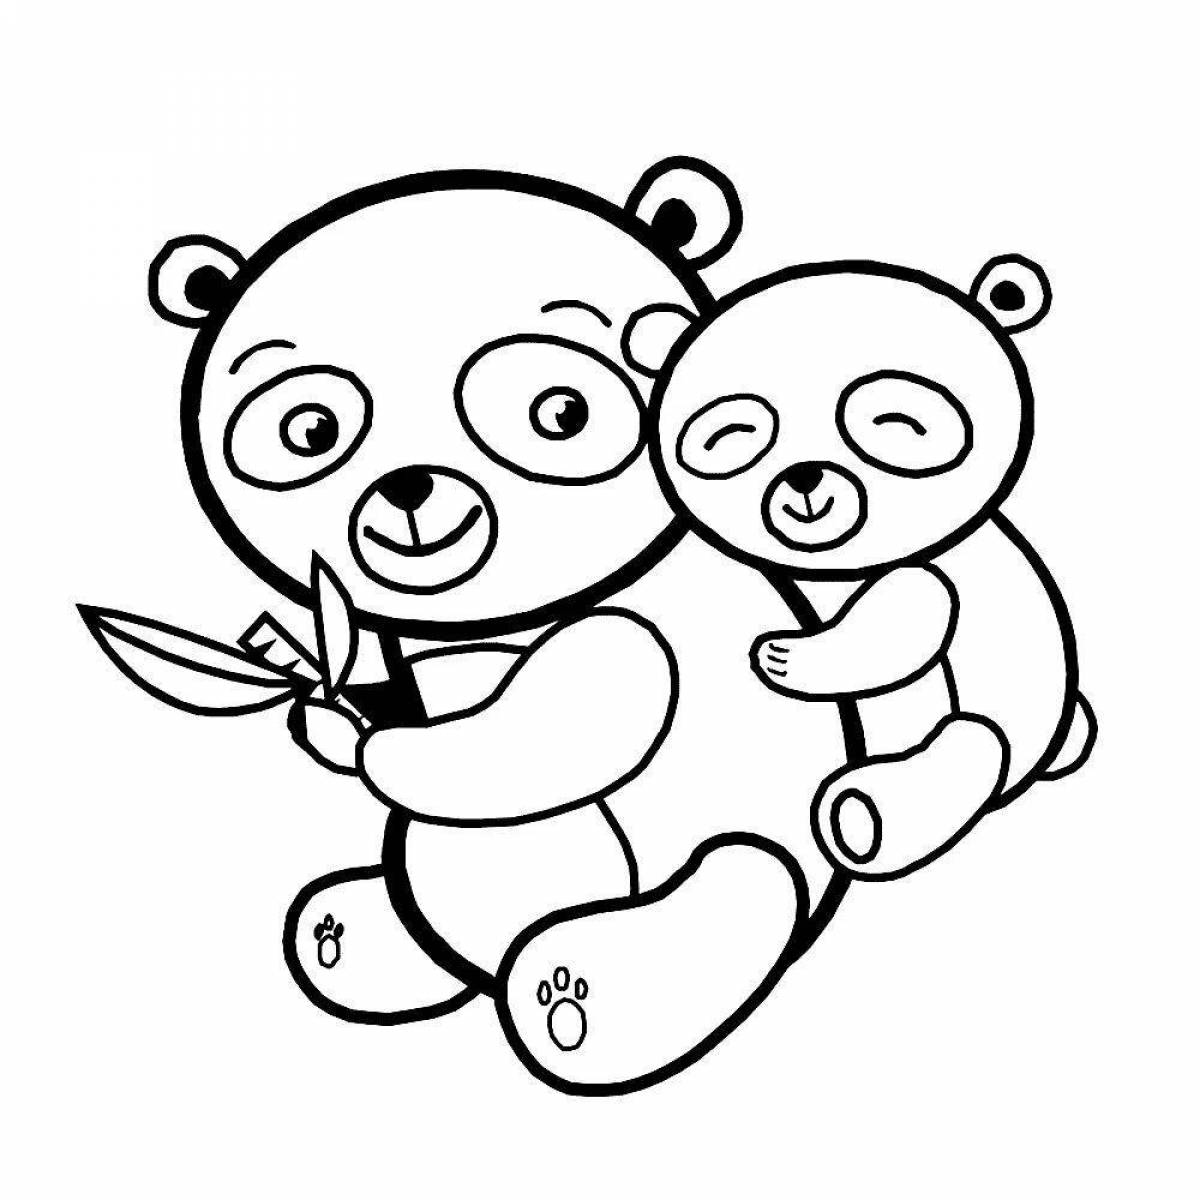 Fancy panda coloring pages for girls